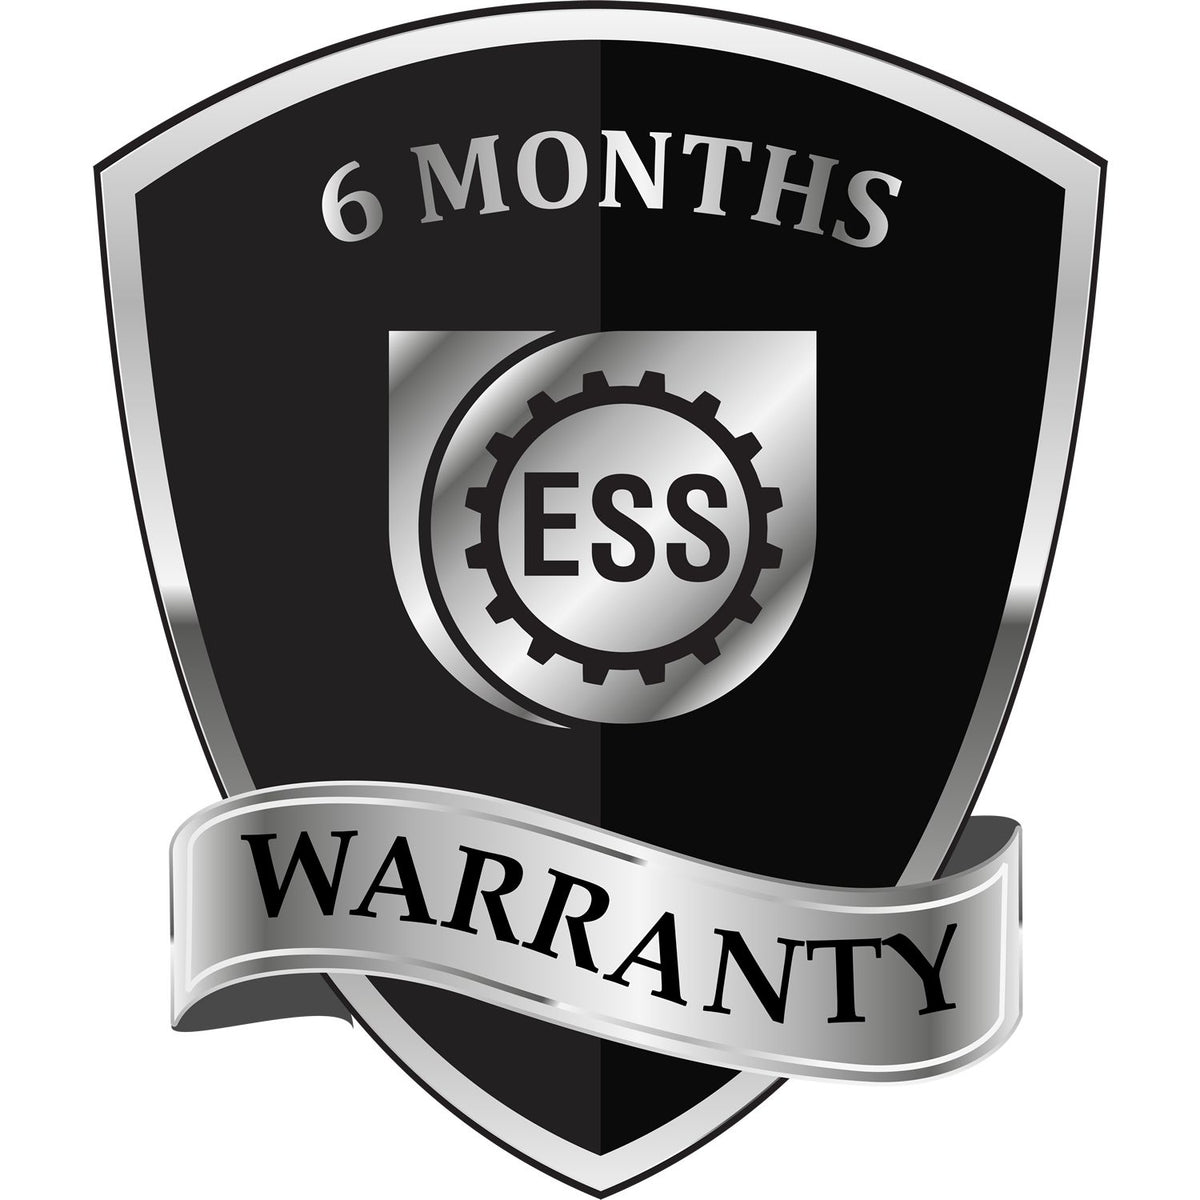 A black and silver badge or emblem showing warranty information for the Massachusetts Professional Geologist Seal Stamp